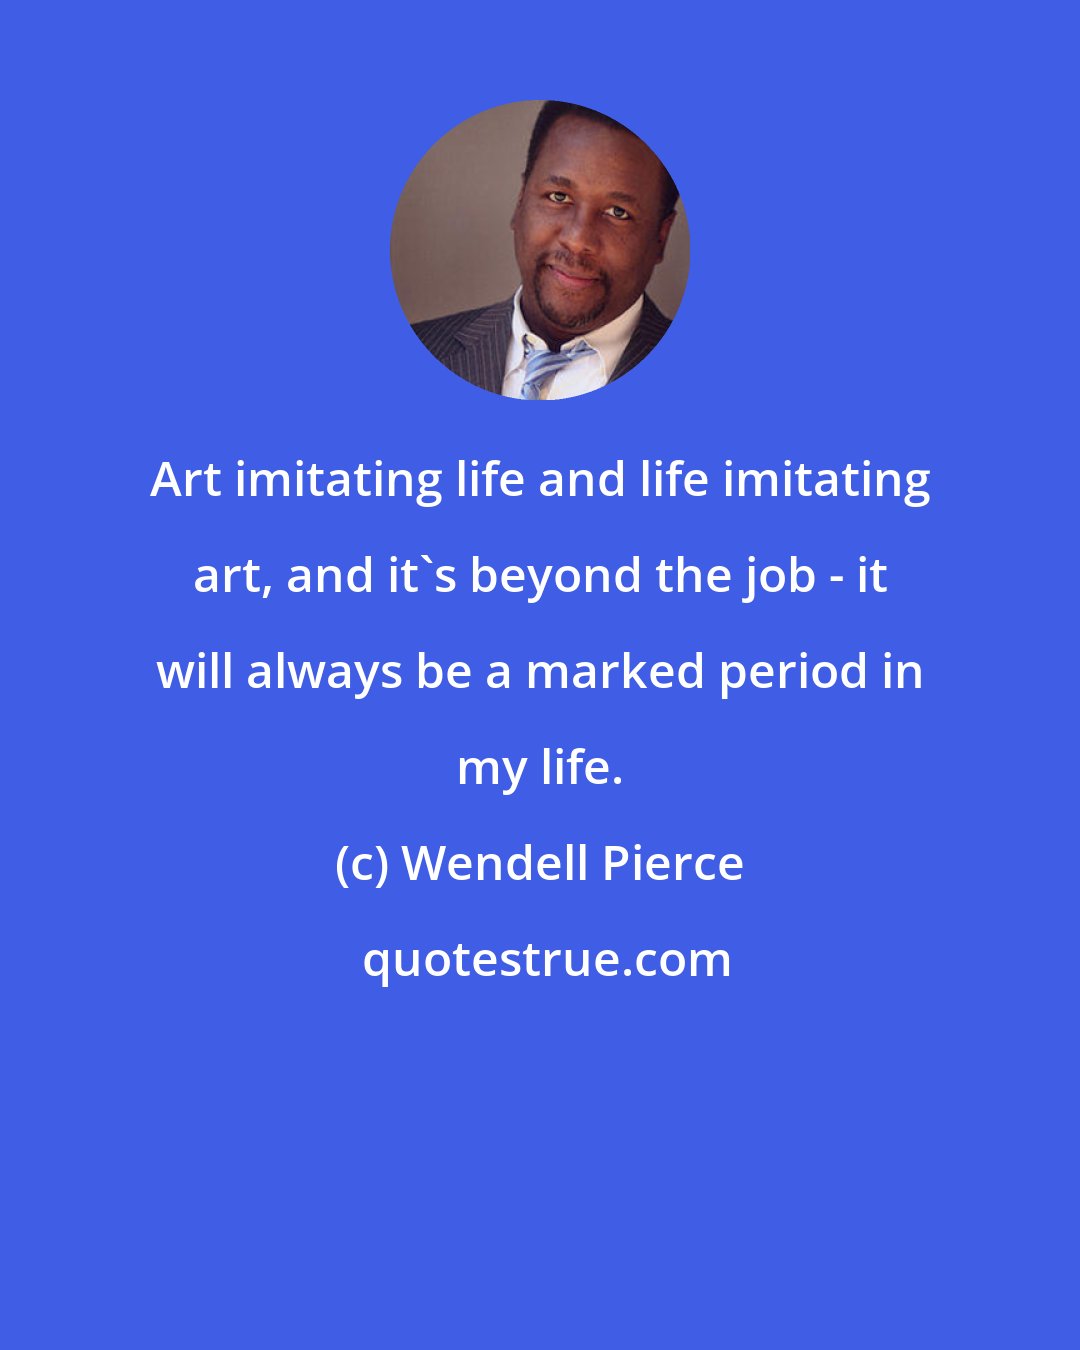 Wendell Pierce: Art imitating life and life imitating art, and it's beyond the job - it will always be a marked period in my life.